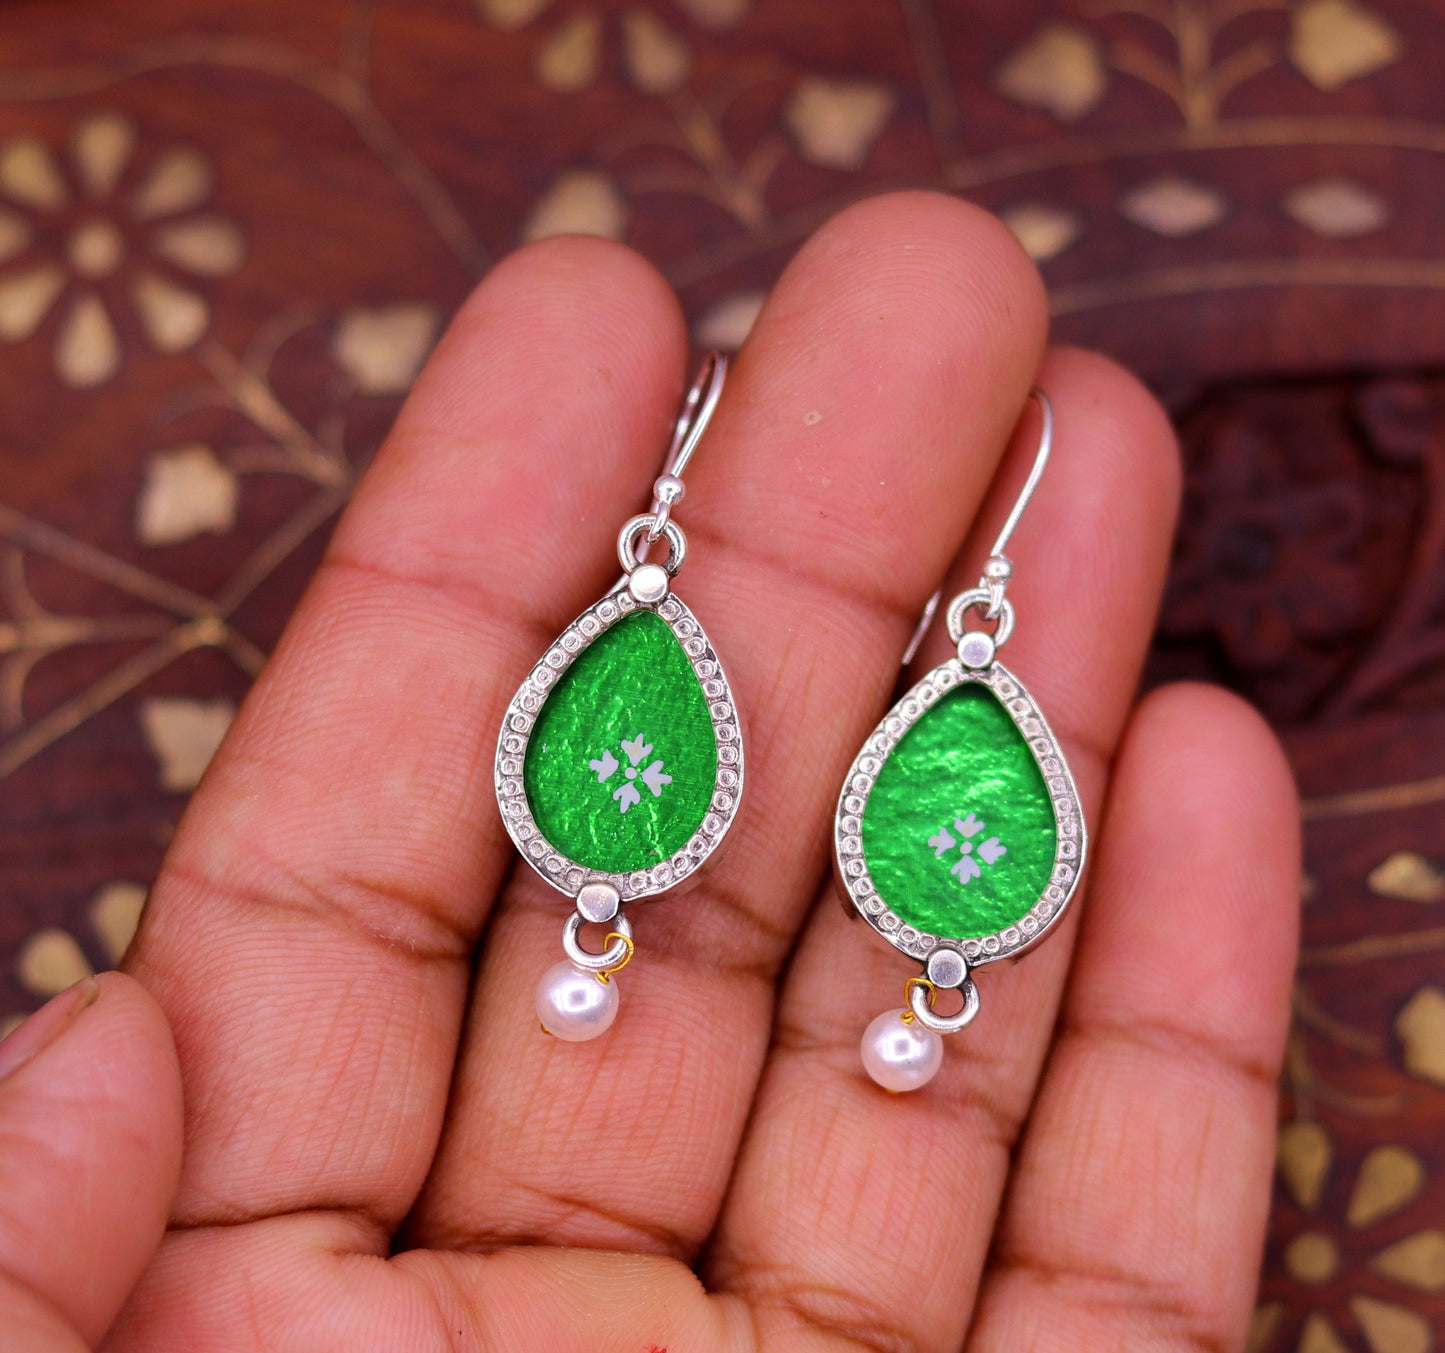 Stylish 925 sterling silver hoops earring drop dangle pearl excellent glass frame green painting ear plug stylish gifting jewelry s634 - TRIBAL ORNAMENTS